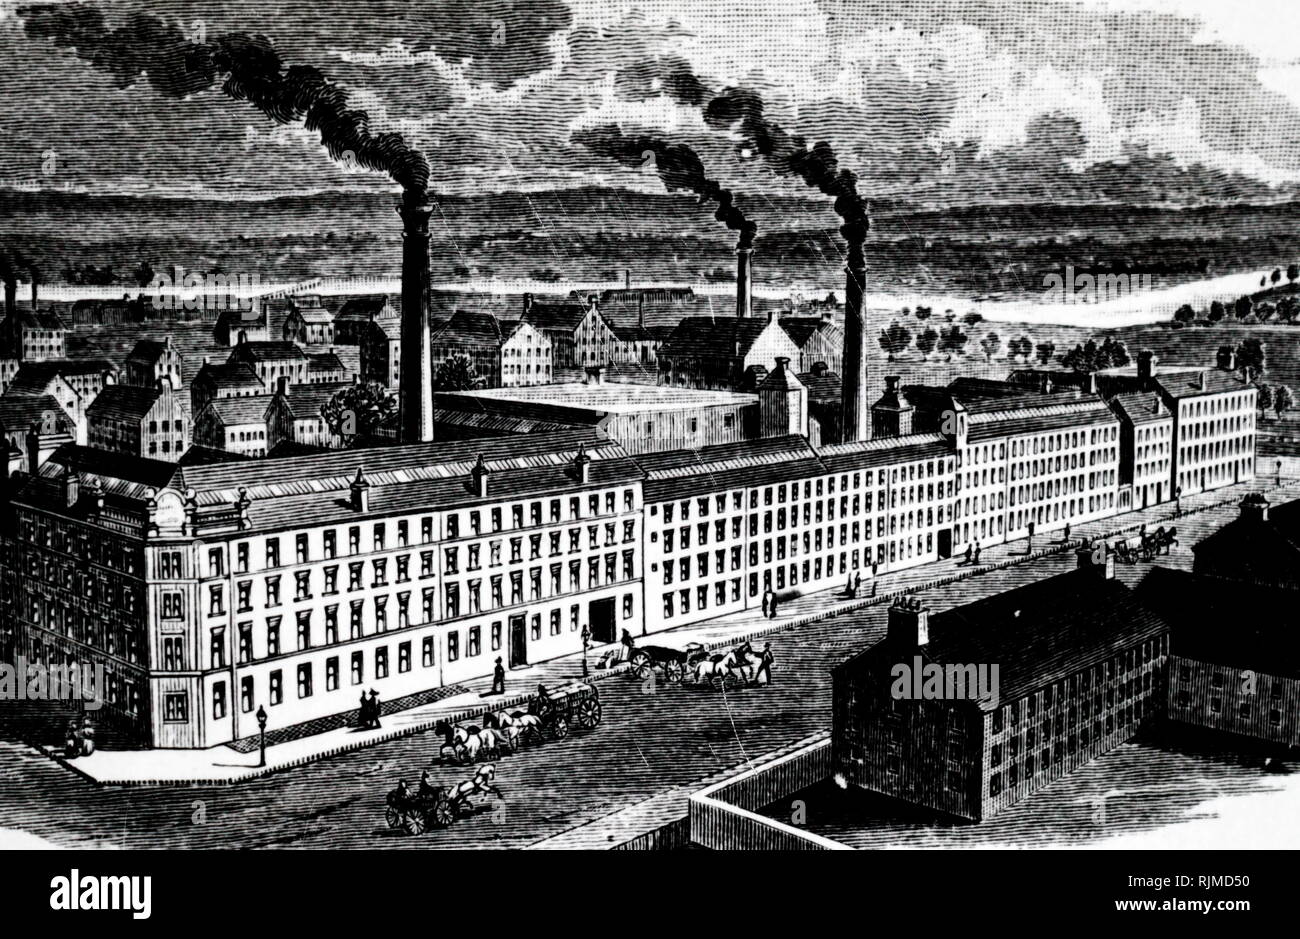 Illustration showing Singer Sewing Machine Factory, Glasgow. From Genius Rewarded or The Story of the Sewing Machine, New York, n.d. (ca 1885) Stock Photo